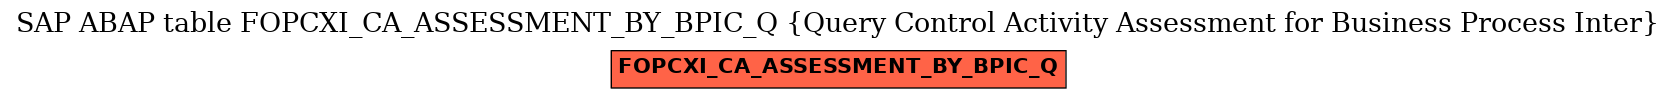 E-R Diagram for table FOPCXI_CA_ASSESSMENT_BY_BPIC_Q (Query Control Activity Assessment for Business Process Inter)